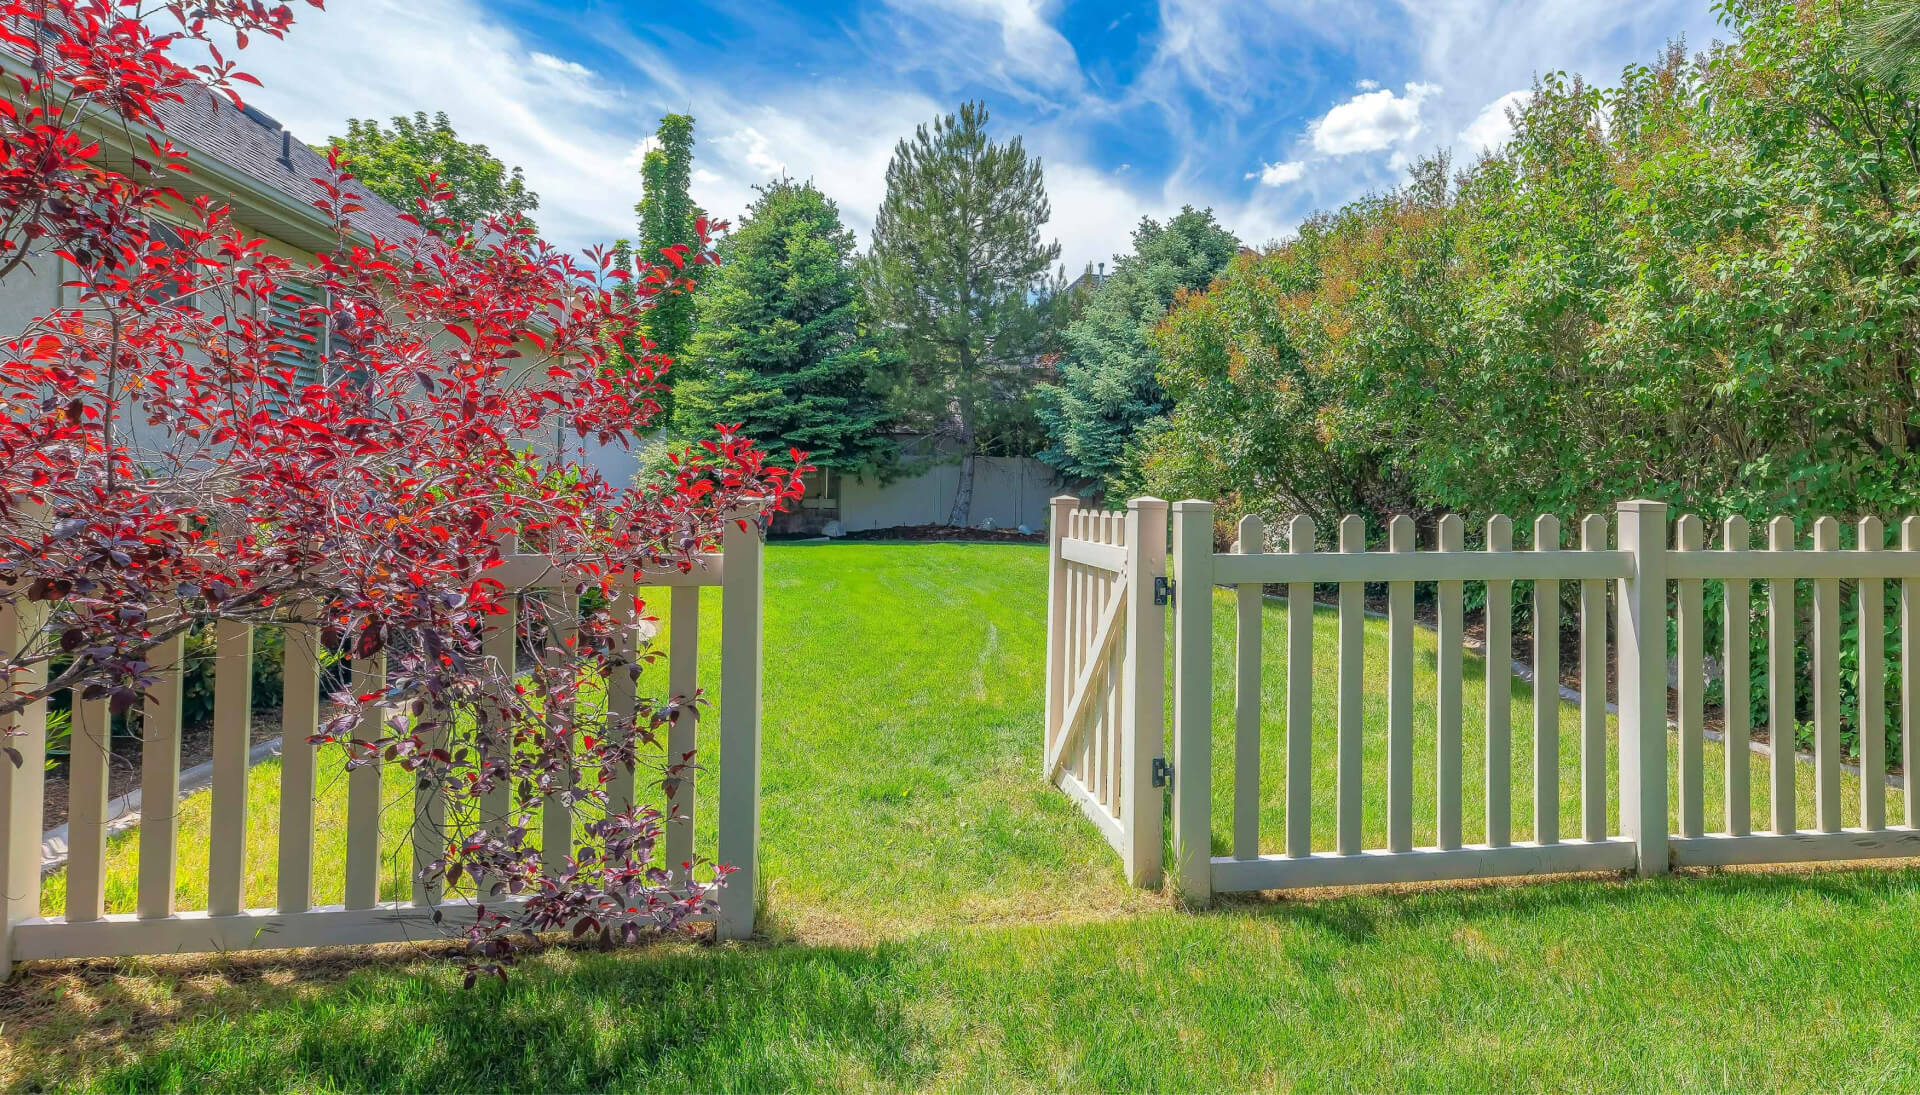 A functional fence gate providing access to a well-maintained backyard, surrounded by a wooden fence in Dallas